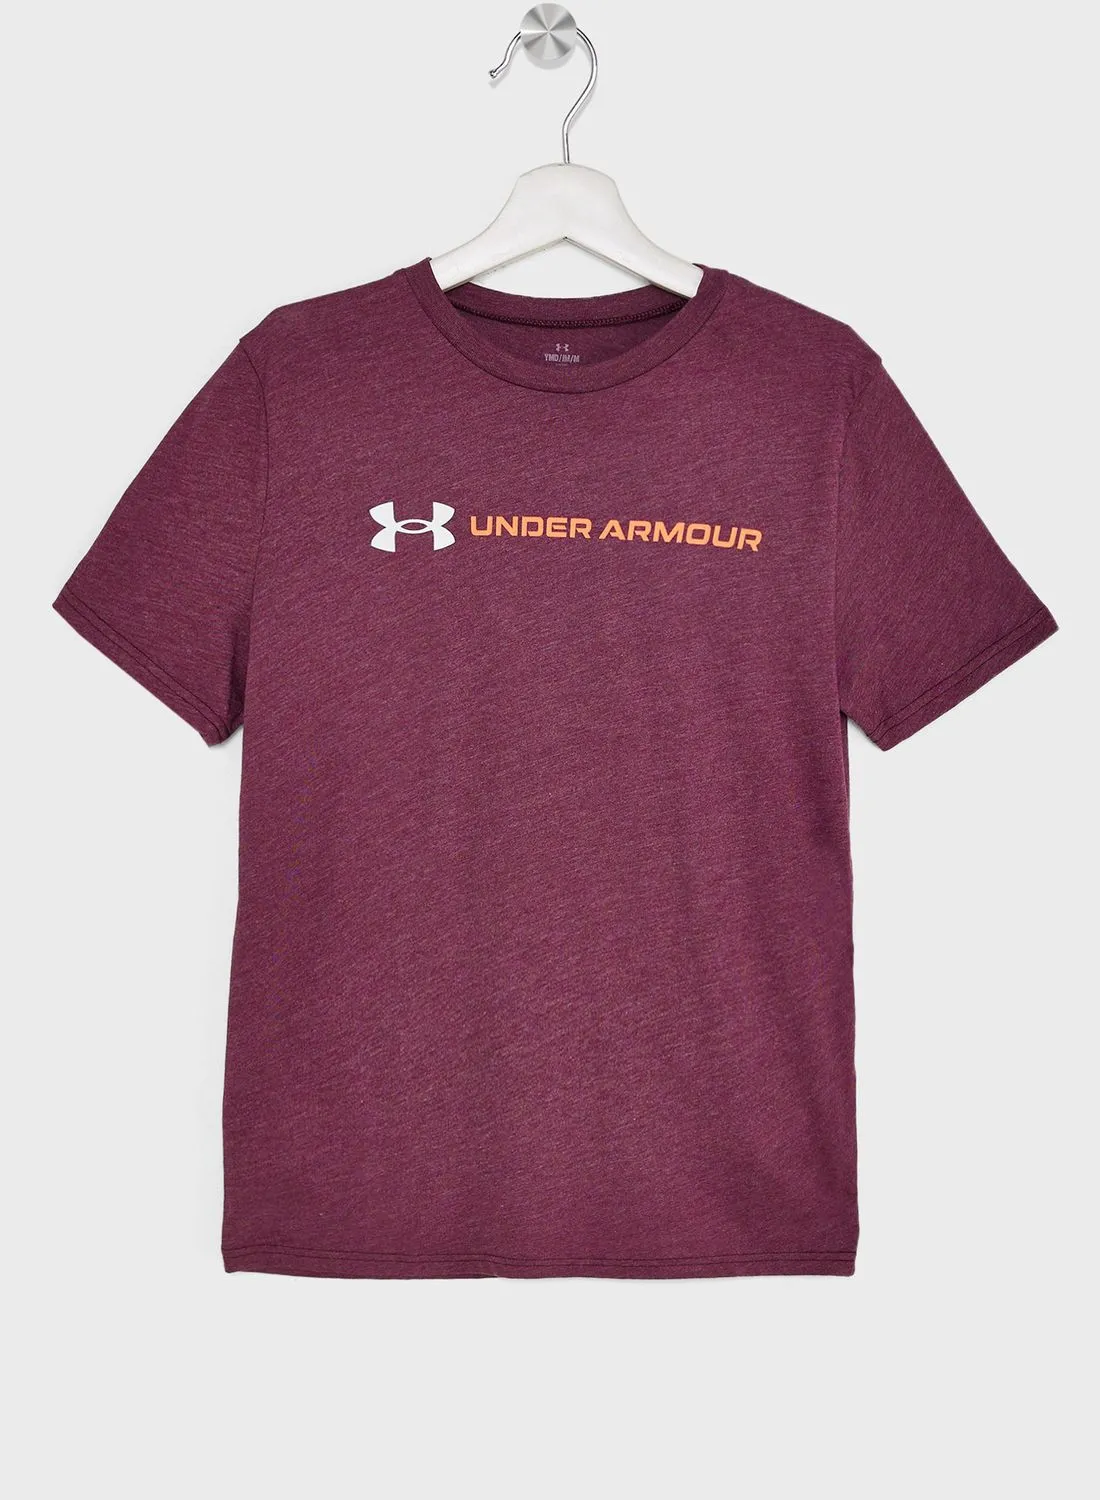 UNDER ARMOUR Youth Team Issue Wordmark T-Shirt